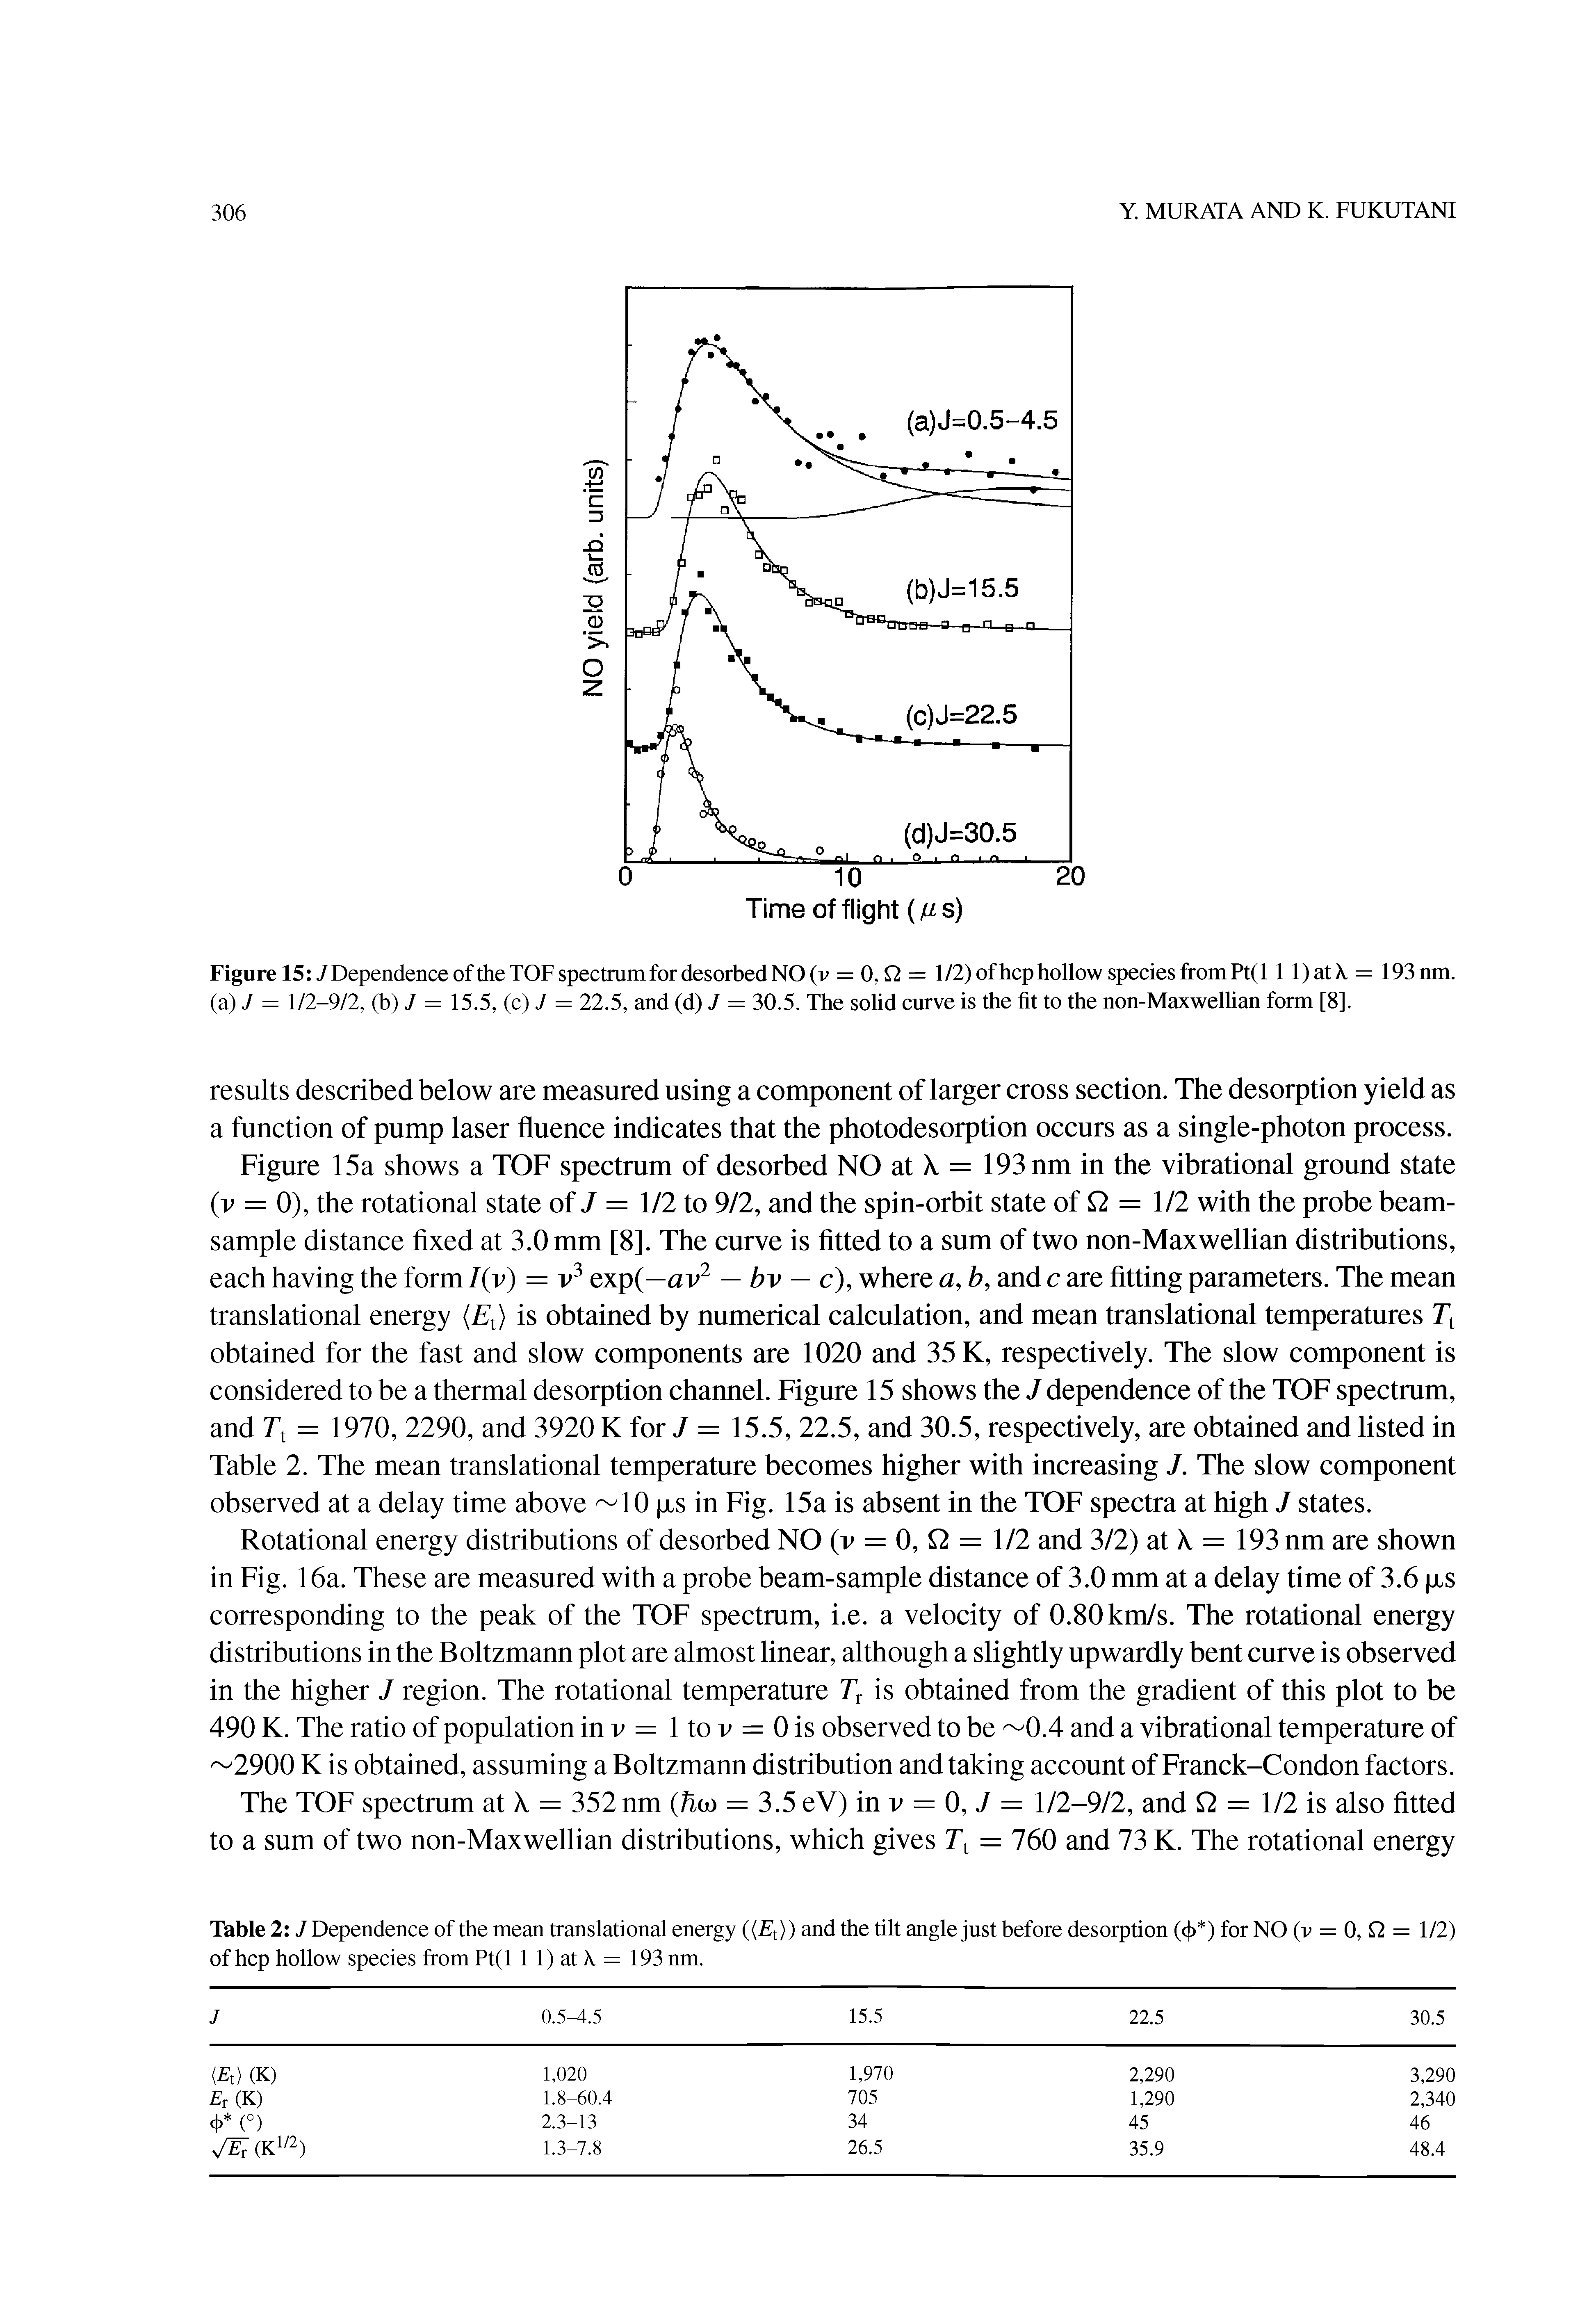 Table 2 / Dependence of the mean translational energy ((Et)) and the tilt angle just before desorption (4) ) for NO (v = 0, 2 = 1/2) ofhcp hollow species from Pt(l 1 1) at X = 193 nm.